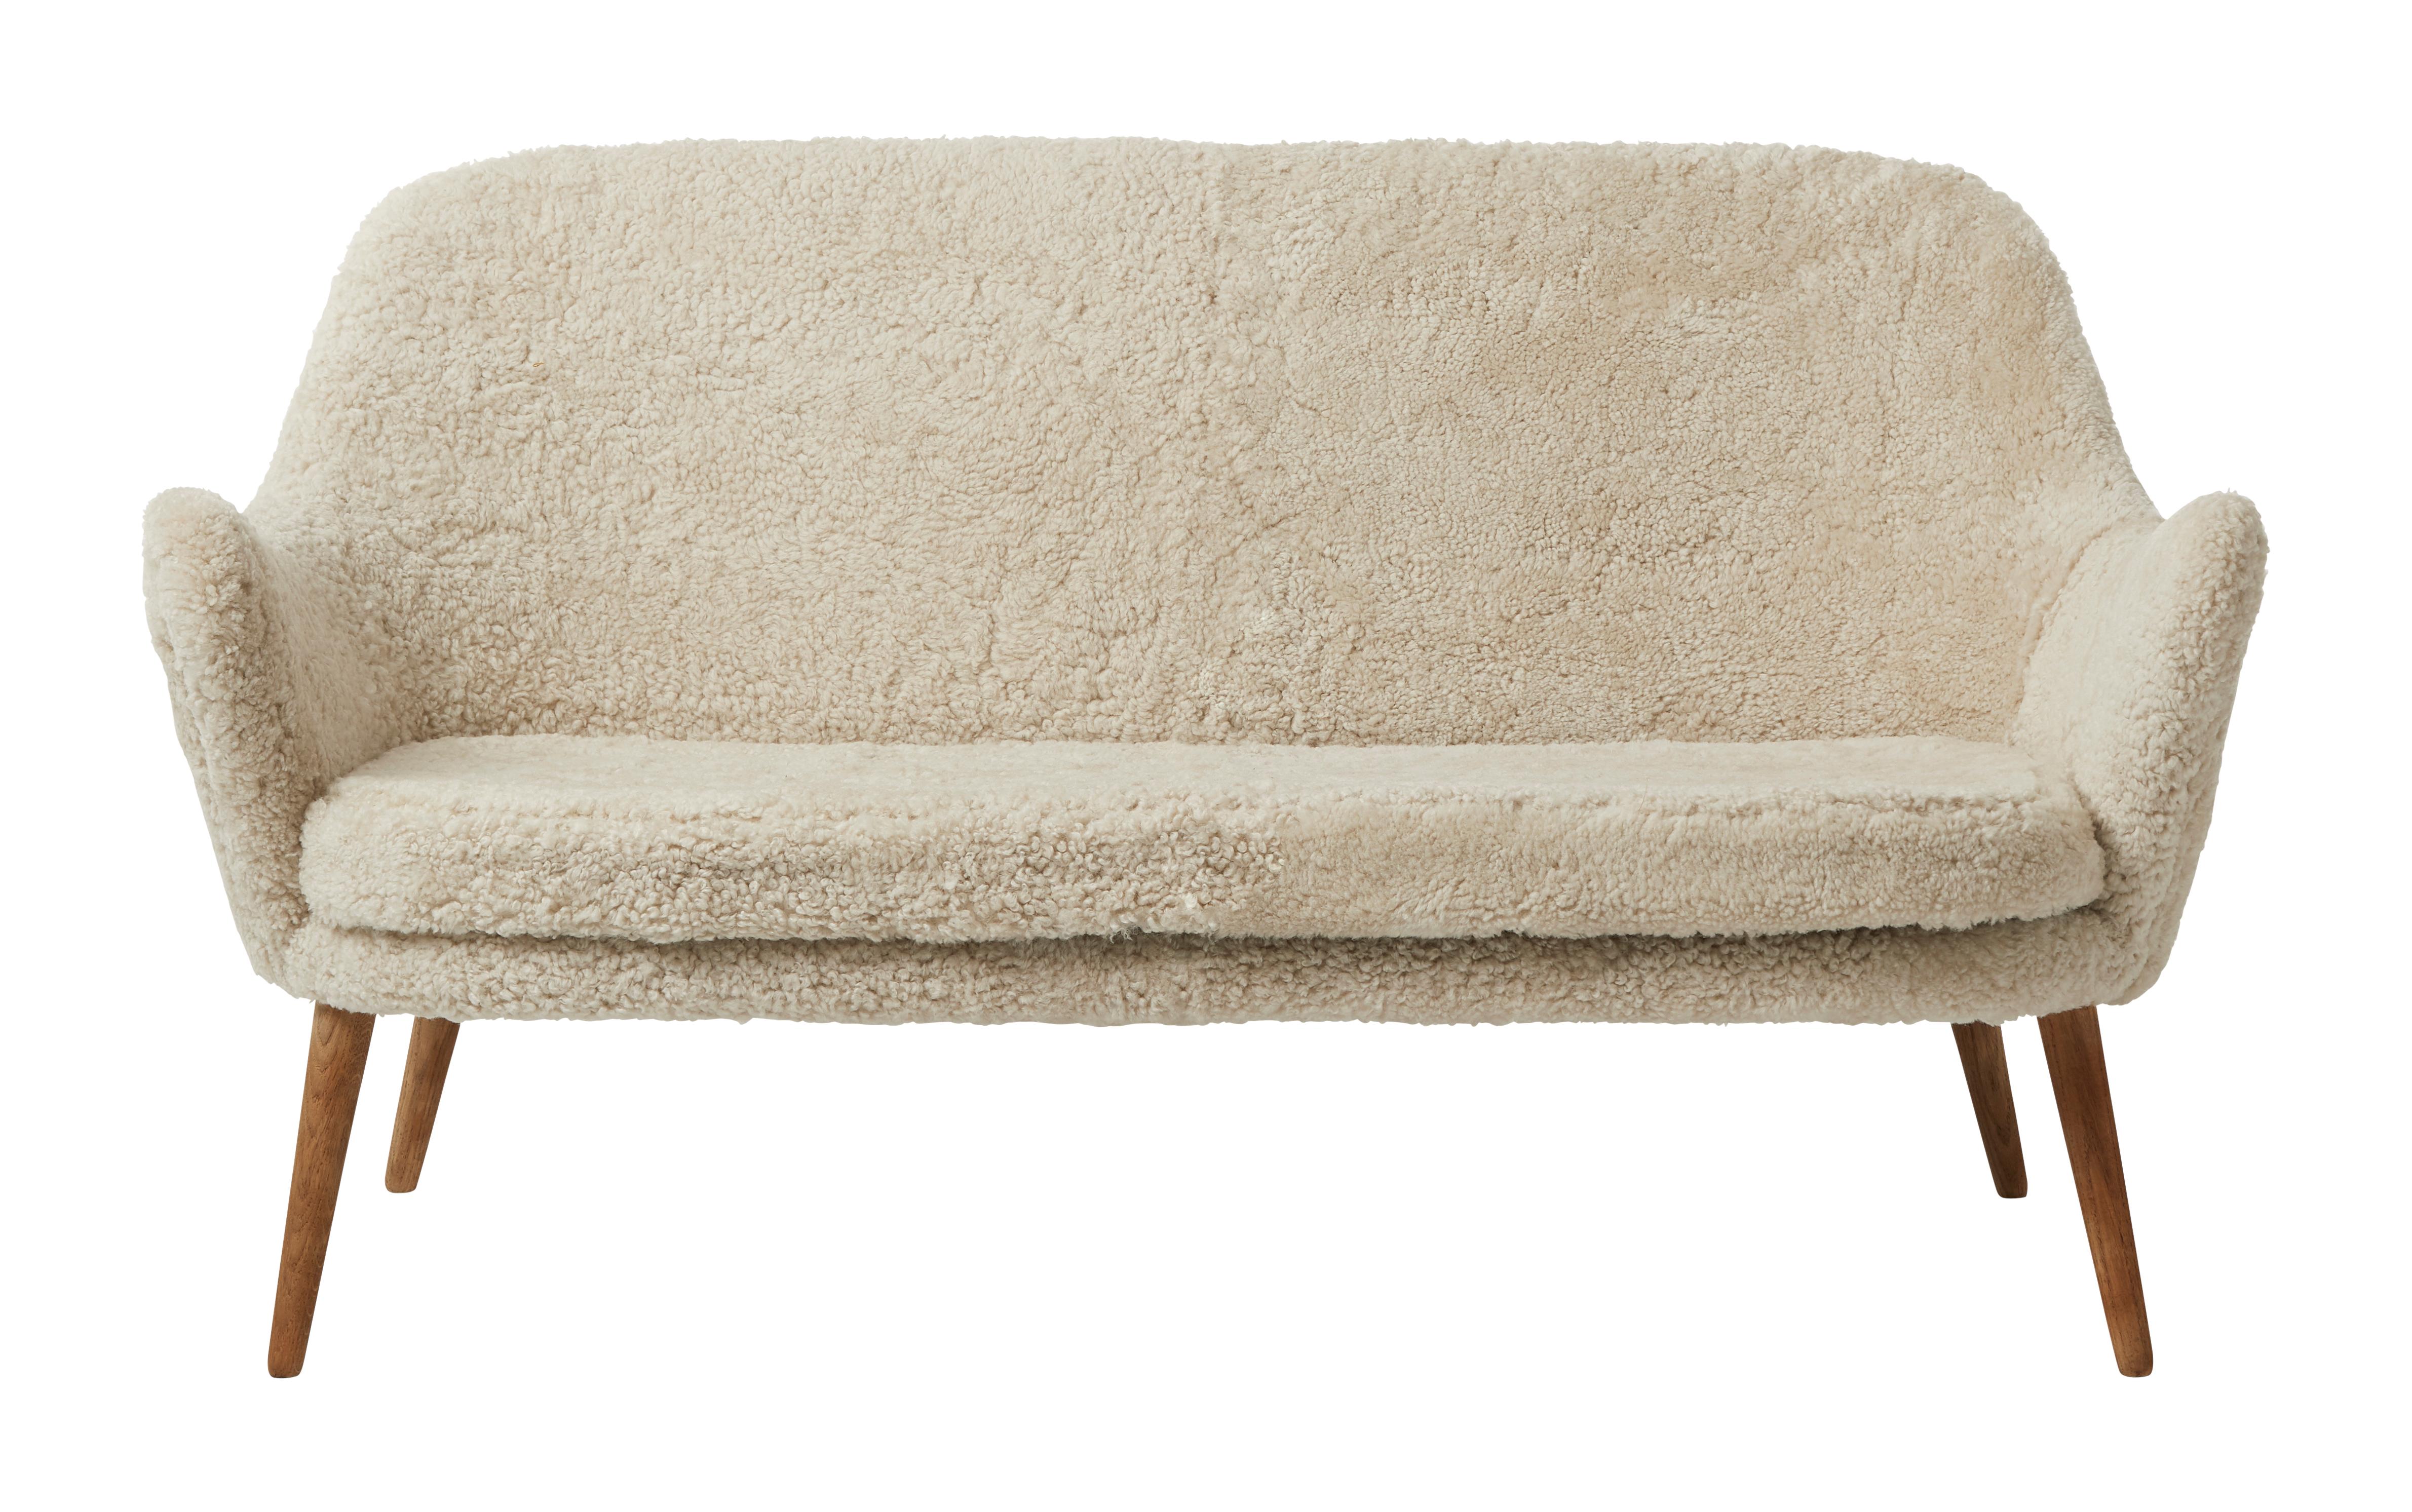 For Sale: White (Sheepskin Moonlight) Dwell 2-Seat Sofa, by Hans Olsen from Warm Nordic